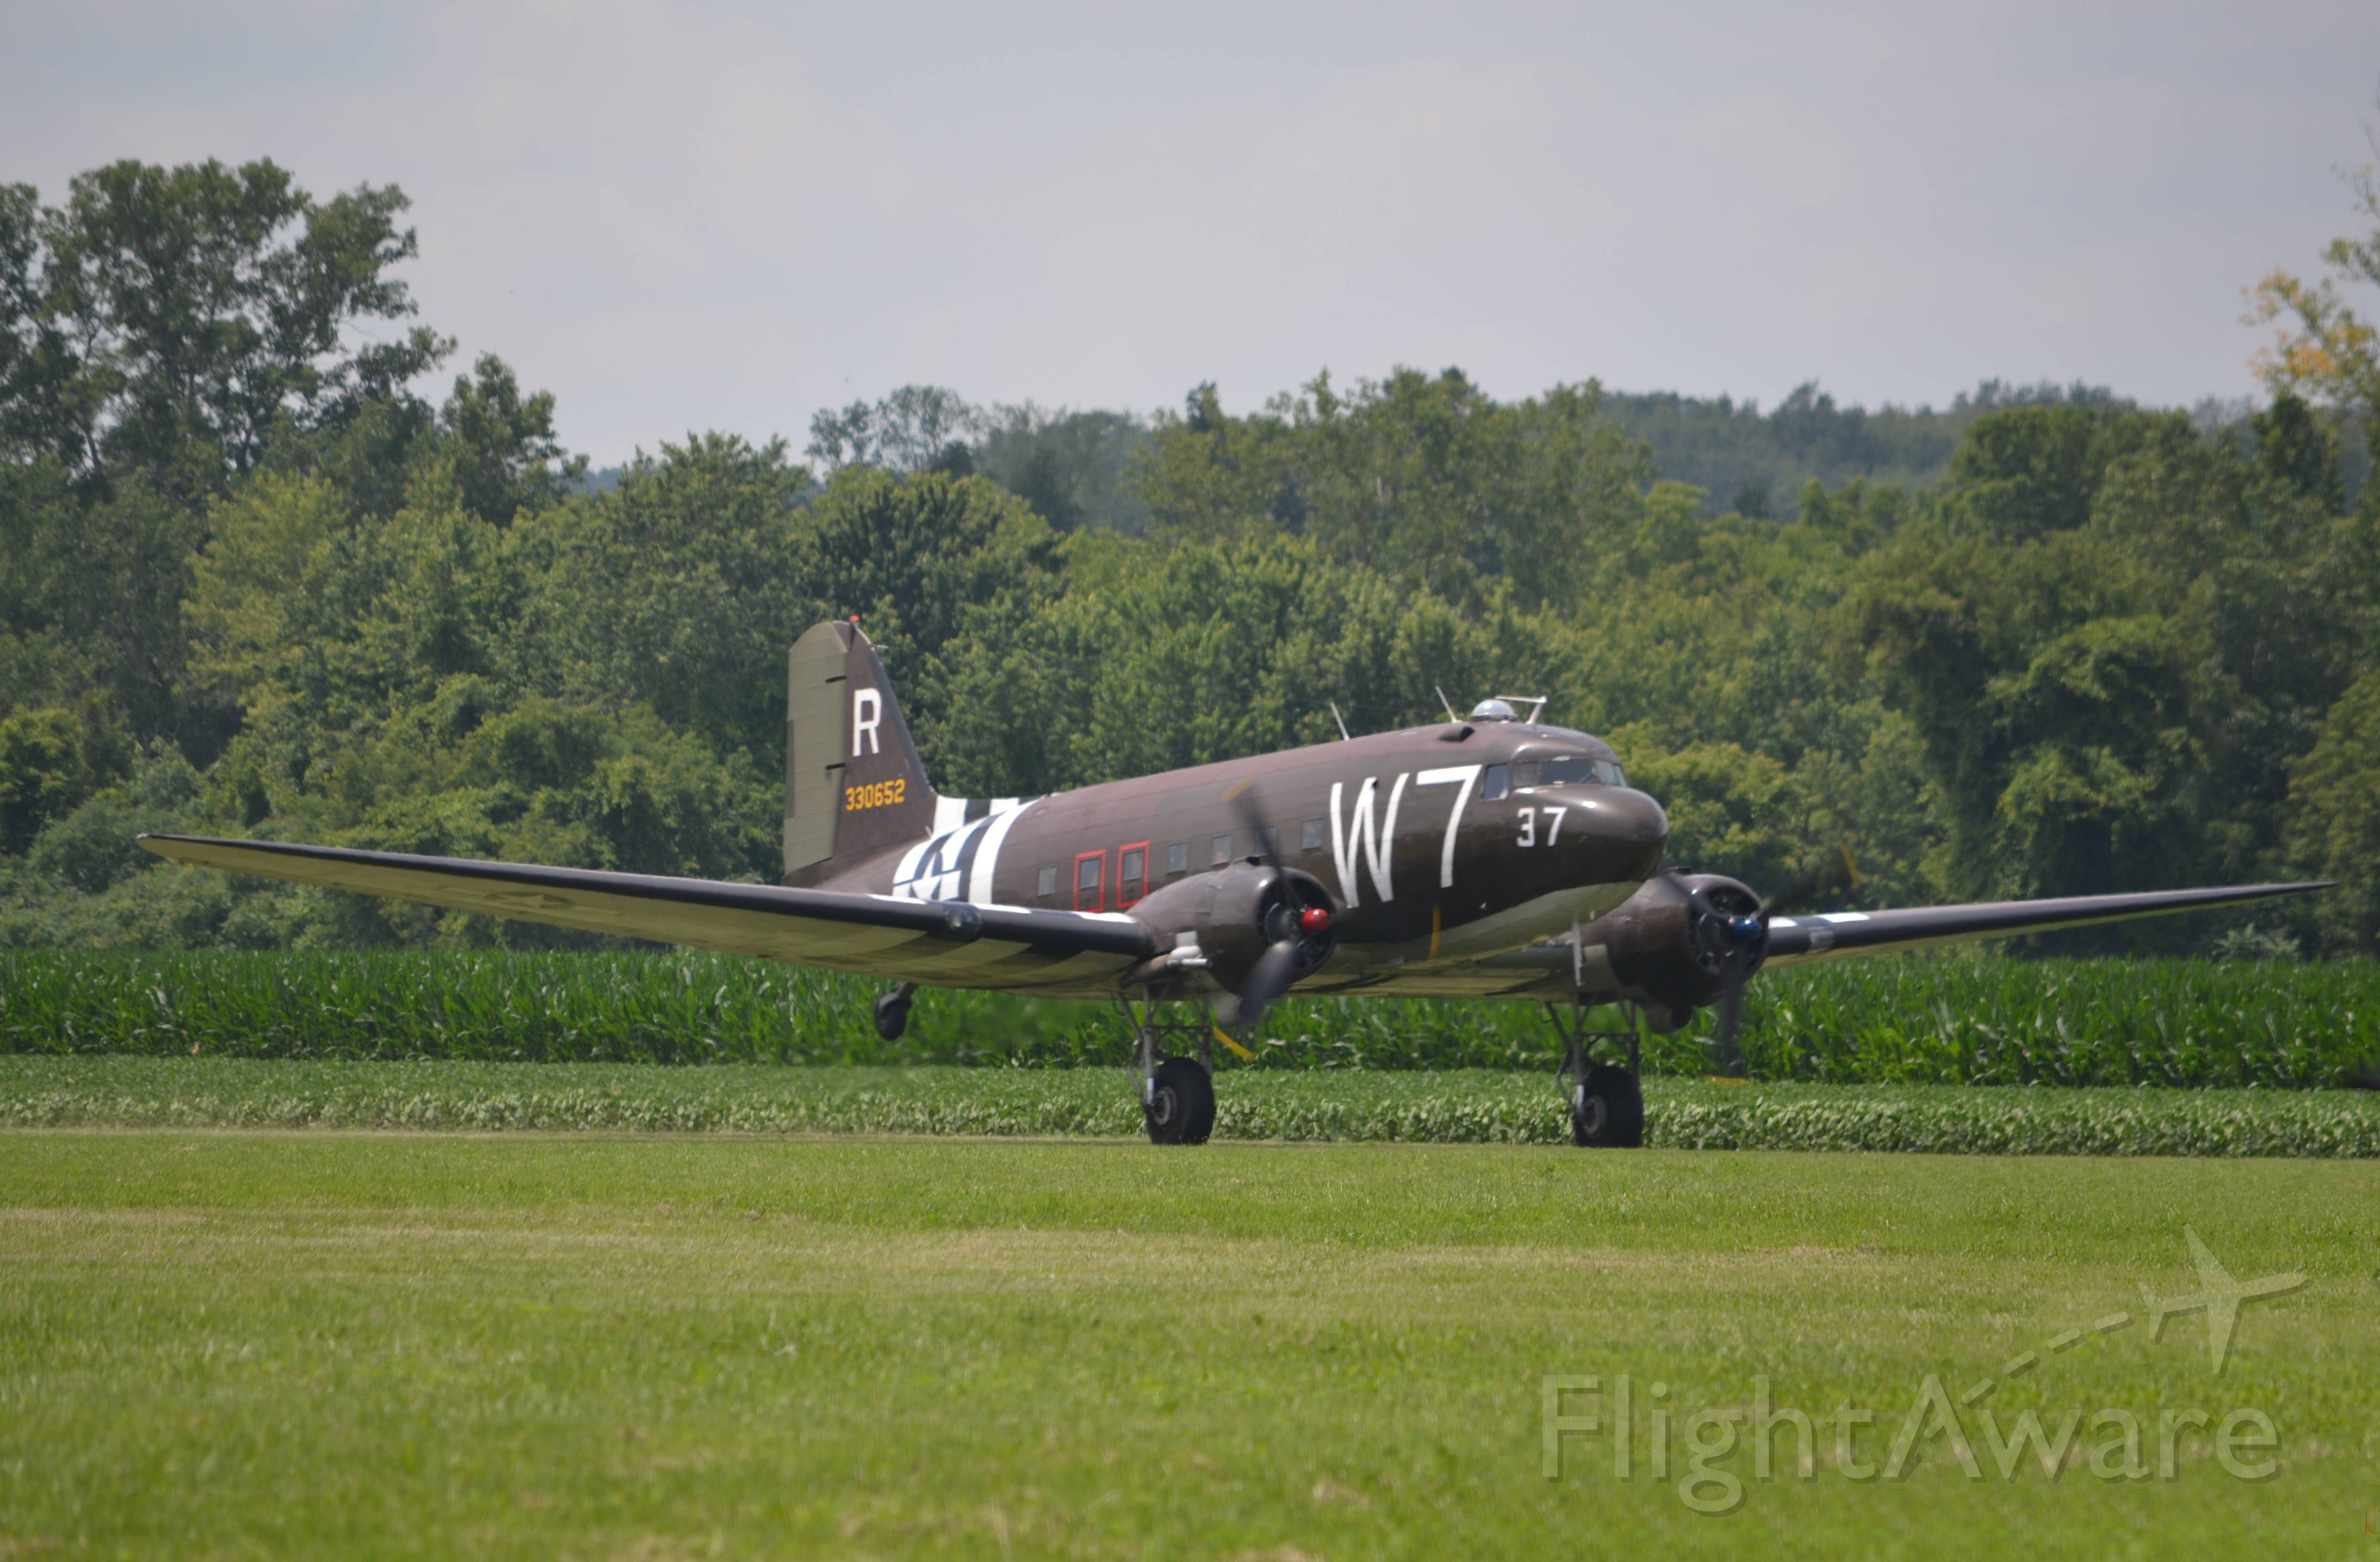 N345AB — - W7 taking off on Arrivals day at the Geneseo airshow.